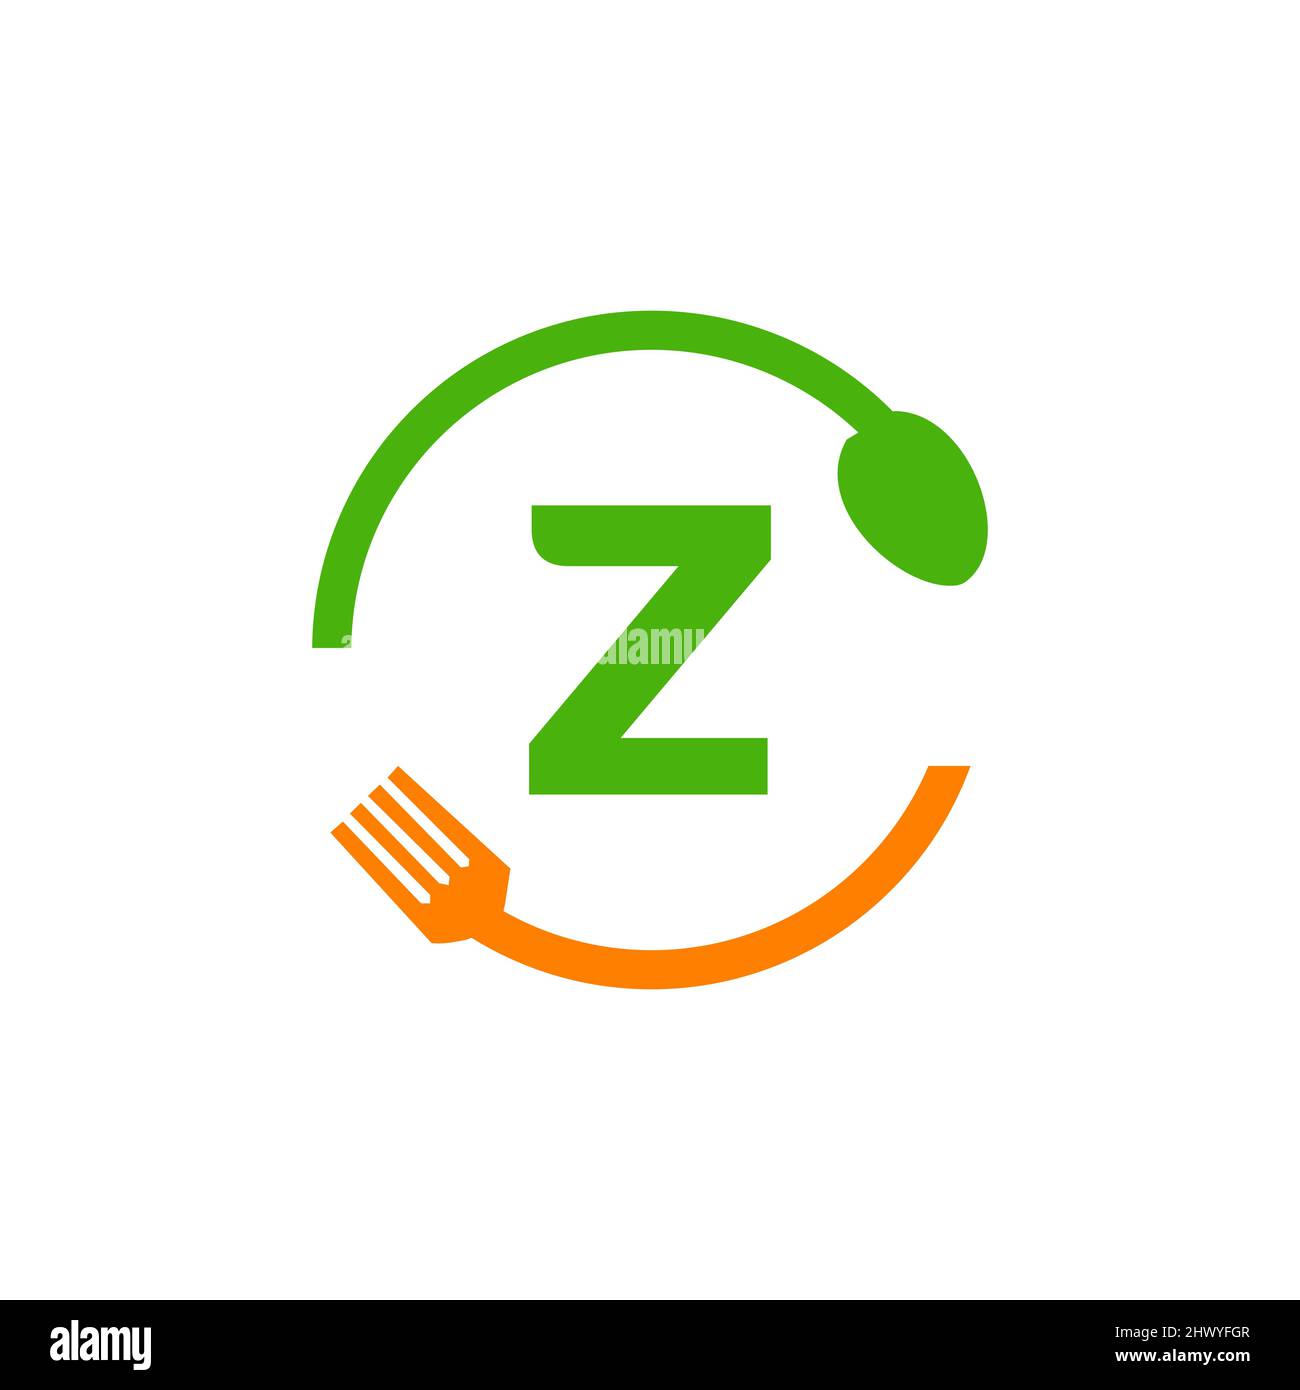 Restaurant Logo Design On Letter Z With Spoon And Fork Concept Template. Cooking Logo, Bbq Sign, Grill Fork With Z Letter Vector Stock Vector